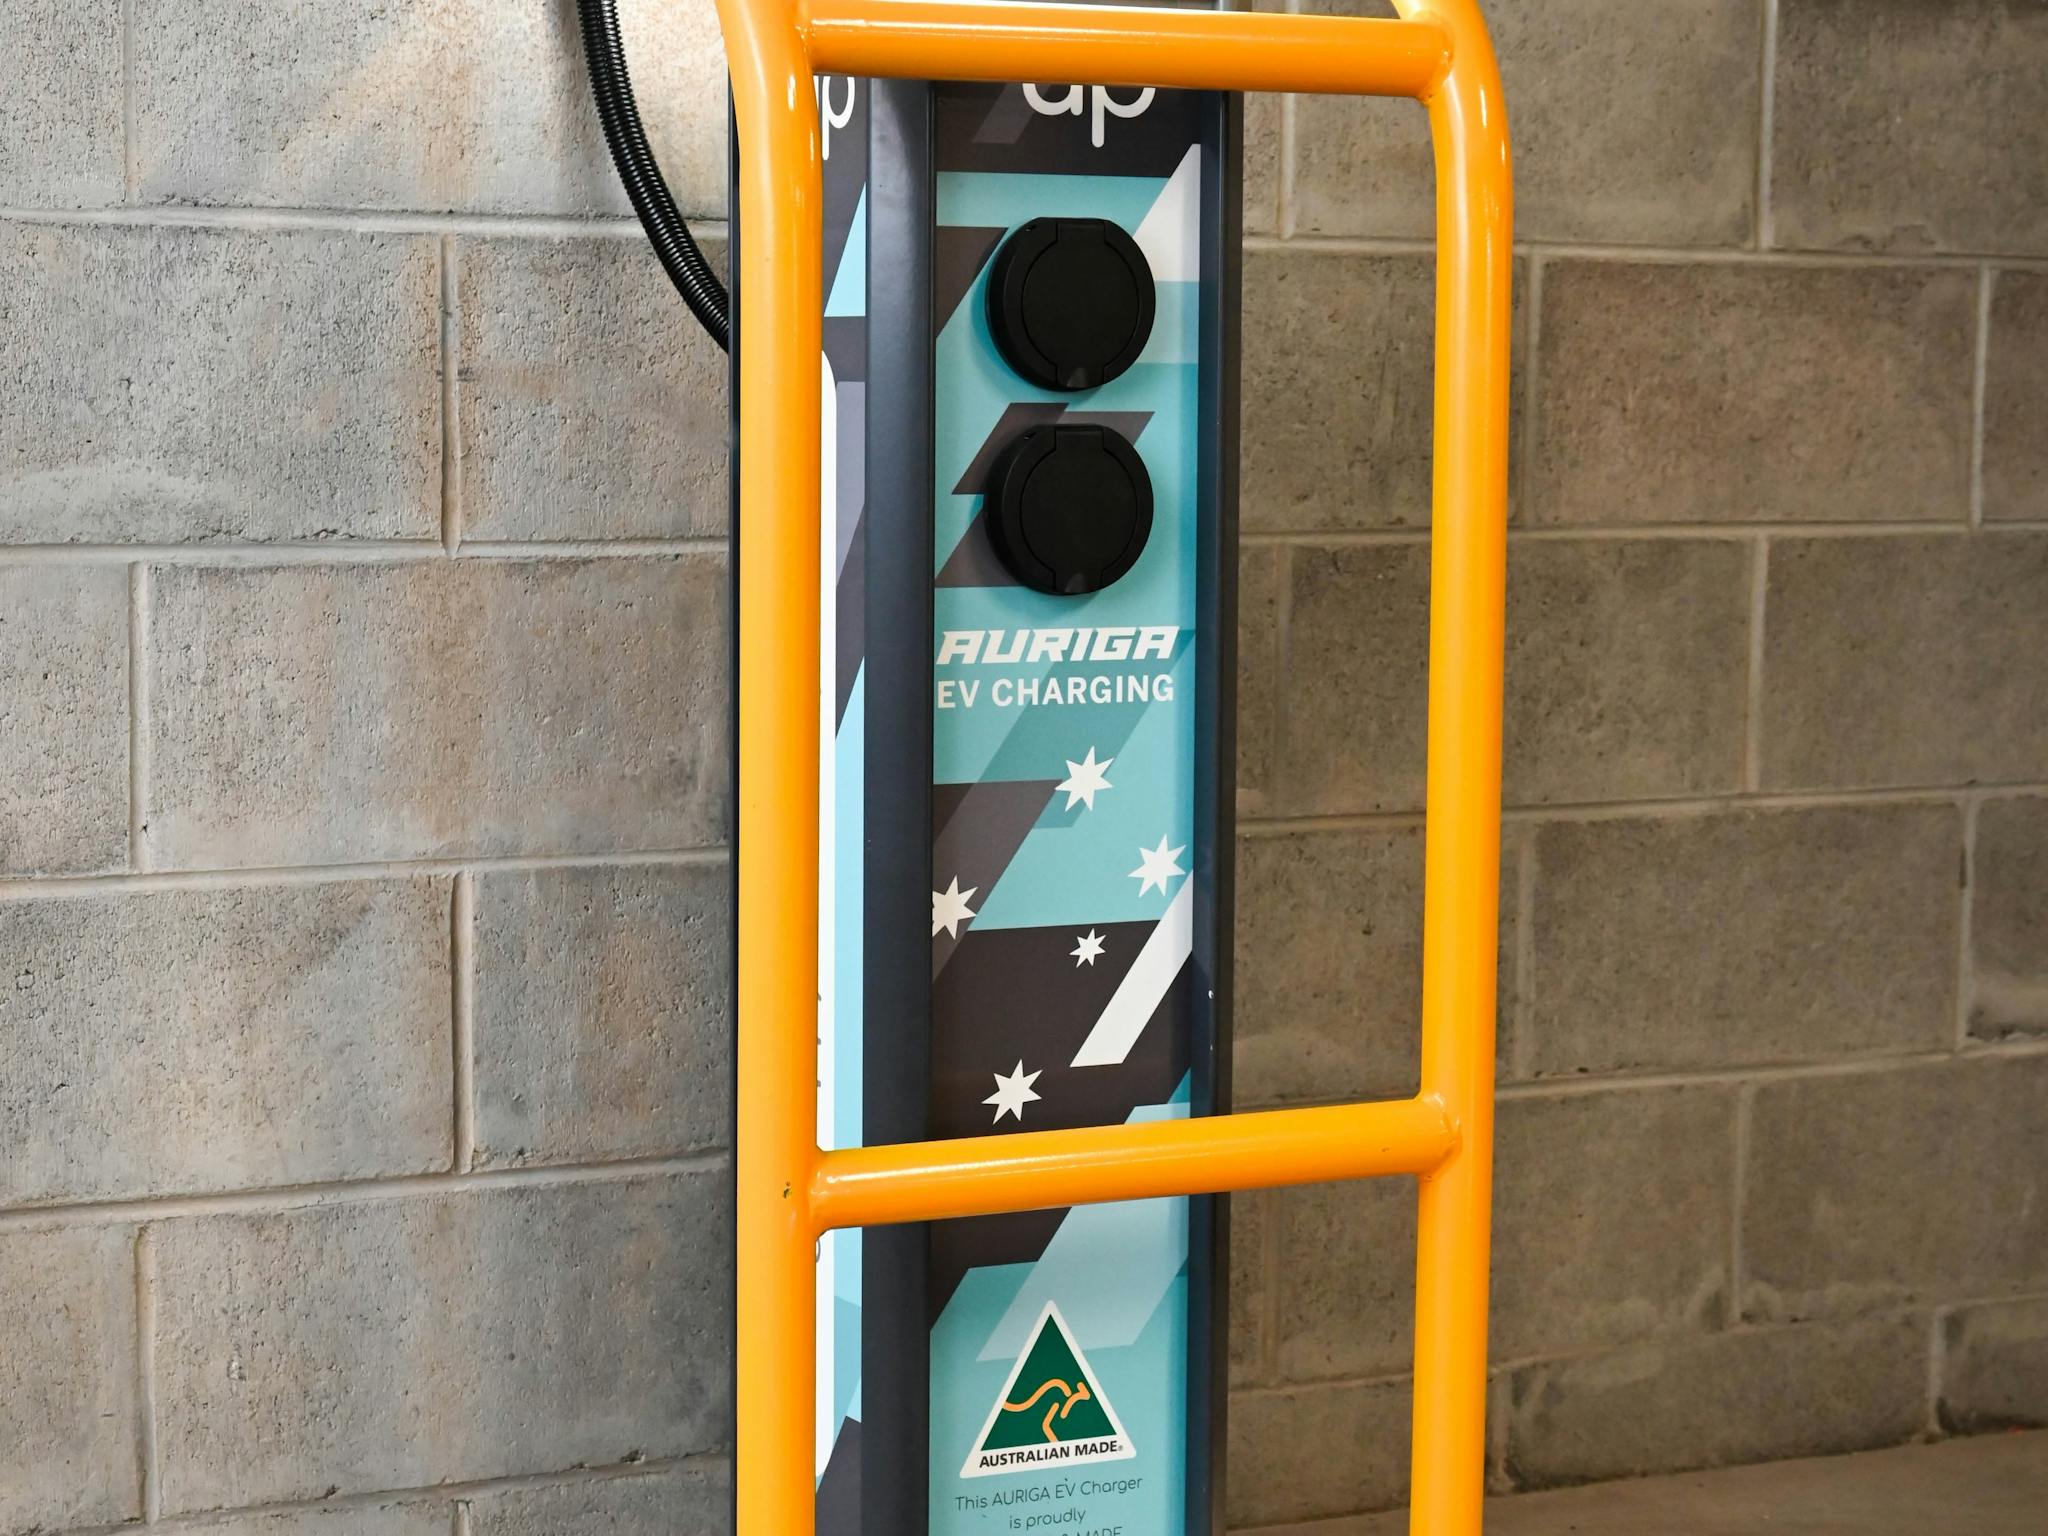 EV chargers are located in the secure underground carpark. Guests have 24 hr access to the chargers